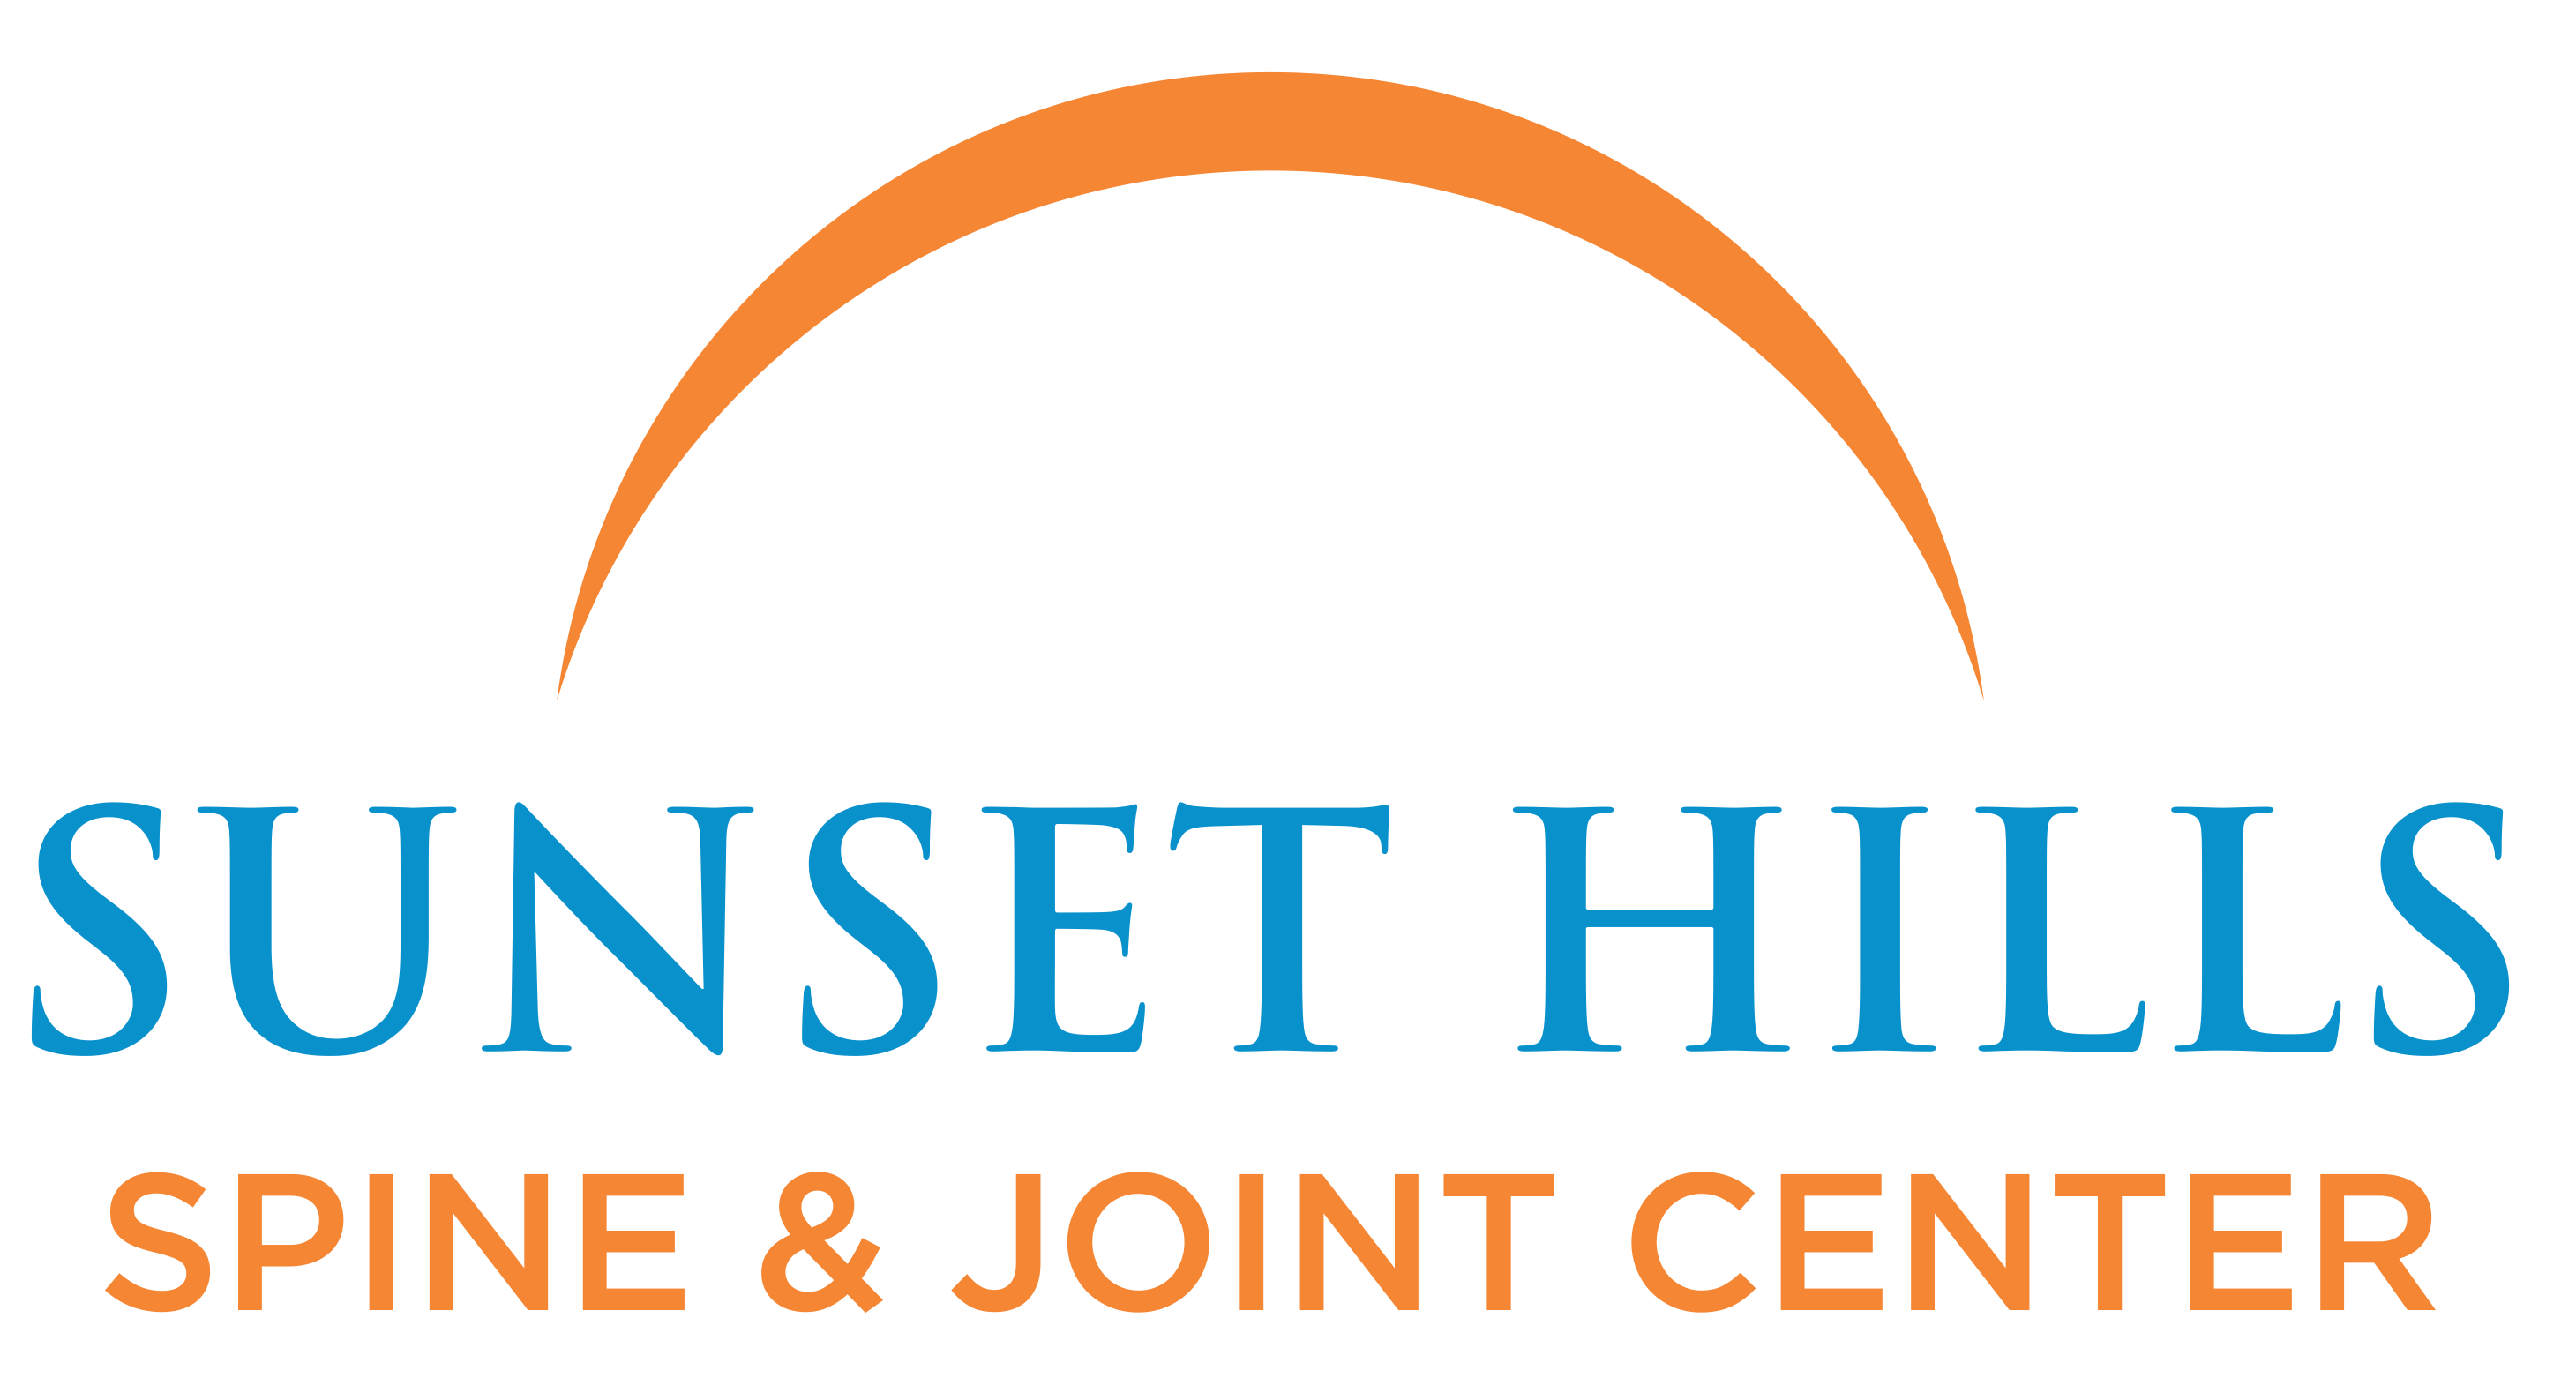 Sunset Hills Spine and Joint Center